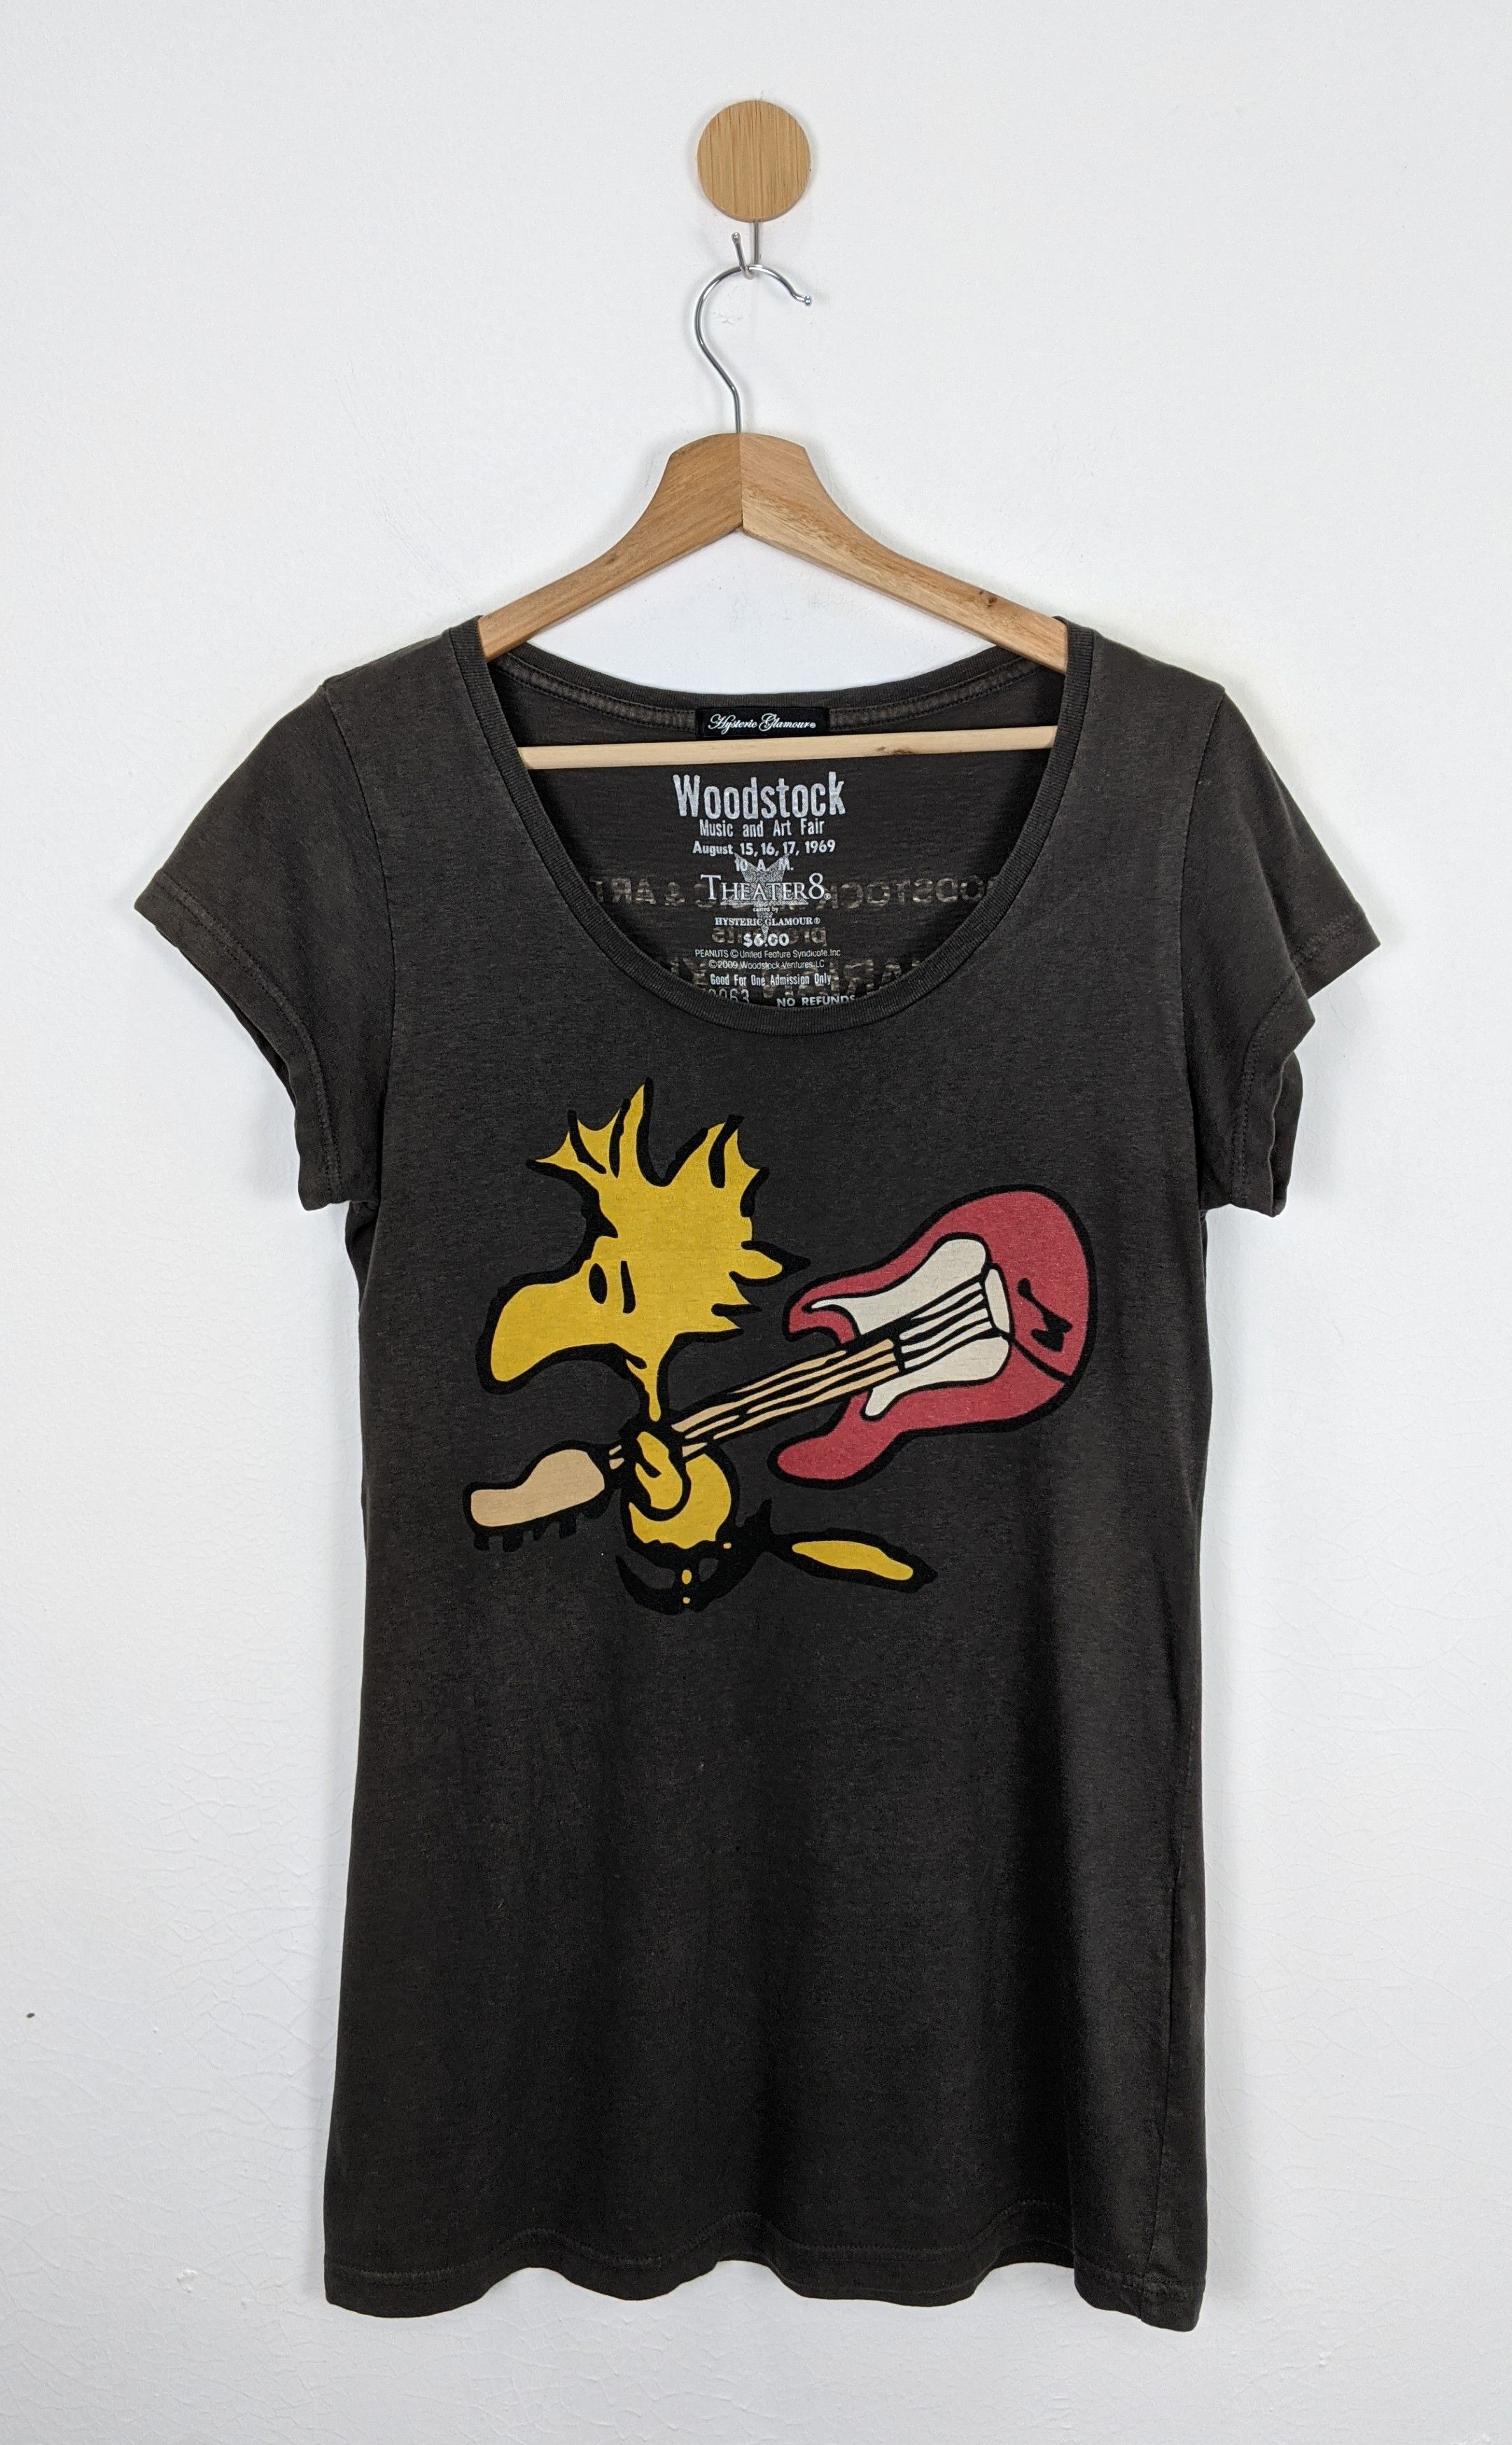 Hysteric Glamour Woodstock Peanuts Theater 8 shirt - 1